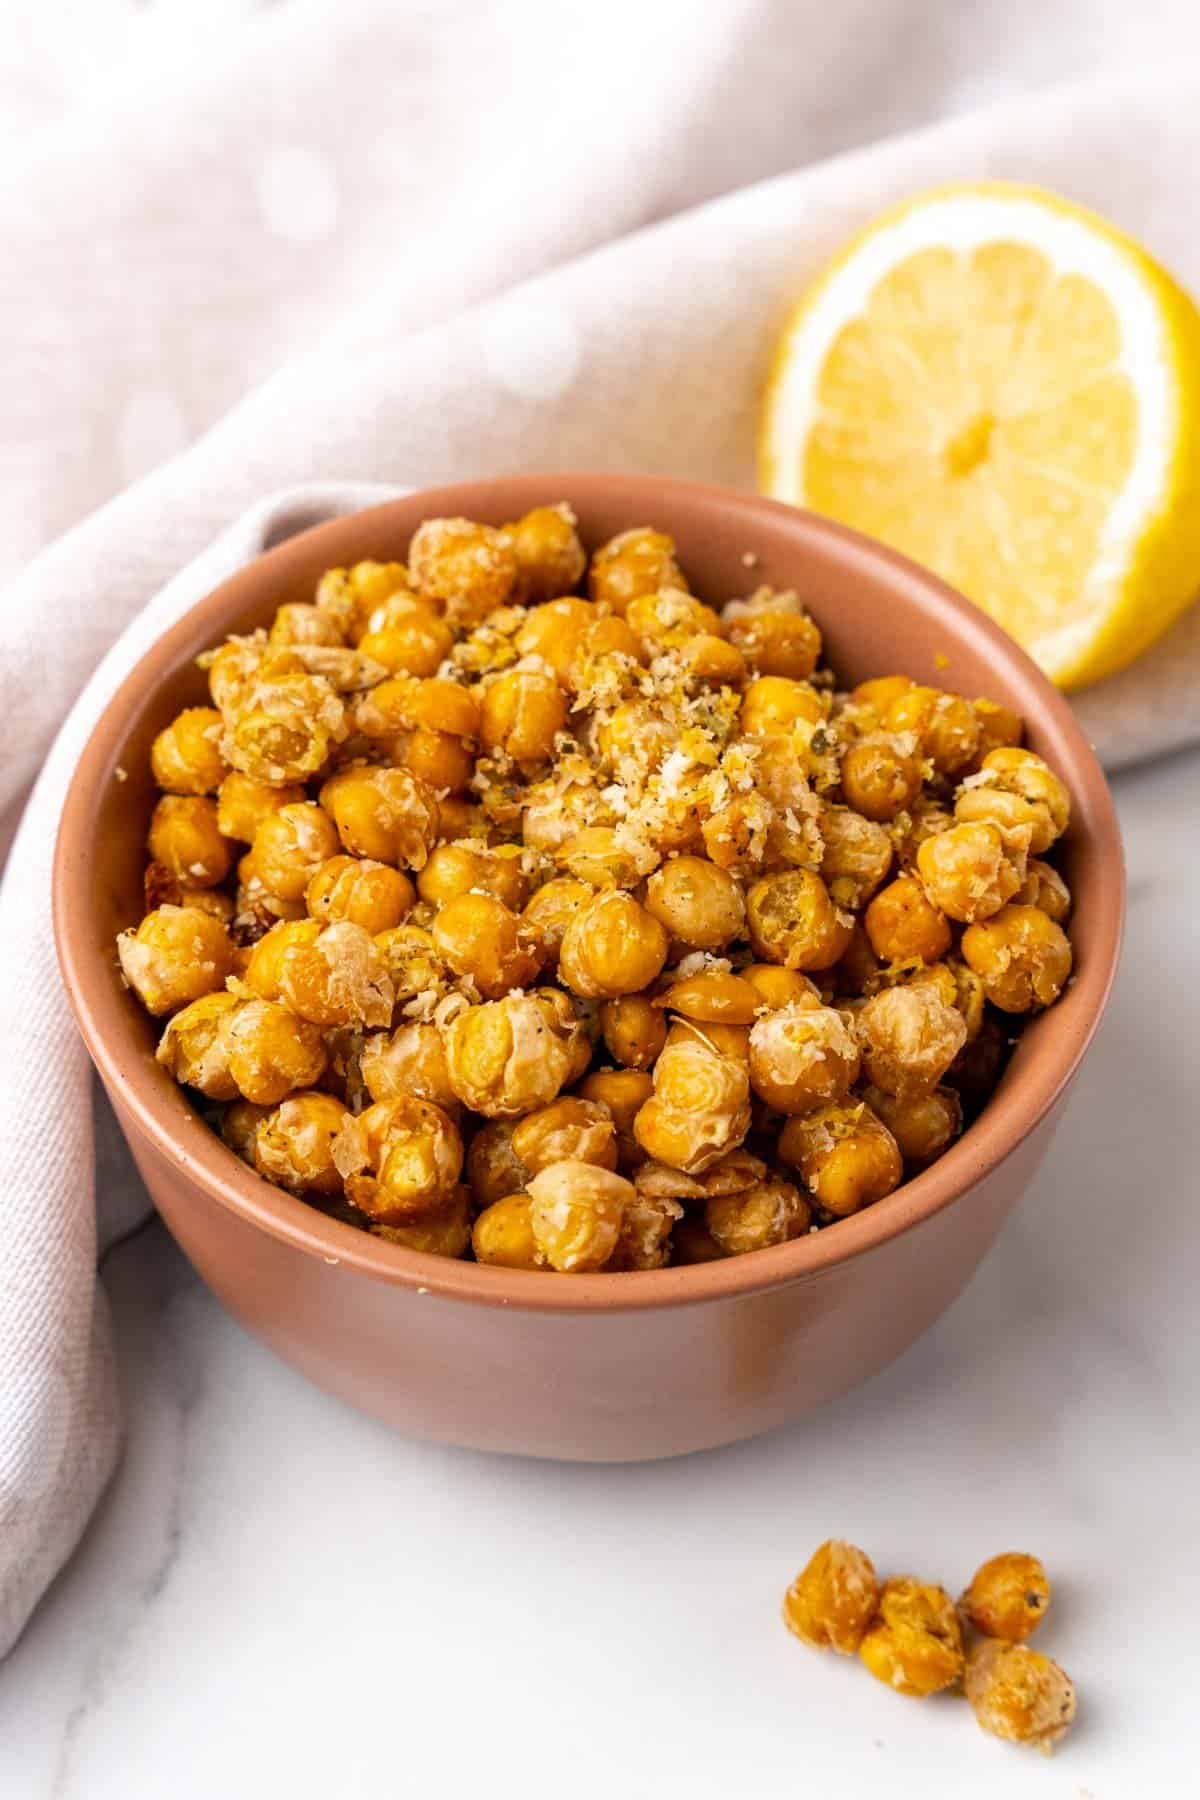 Crispy roasted chickpeas in an orange bowl with an off-white cloth napkin and half of a lemon in the background